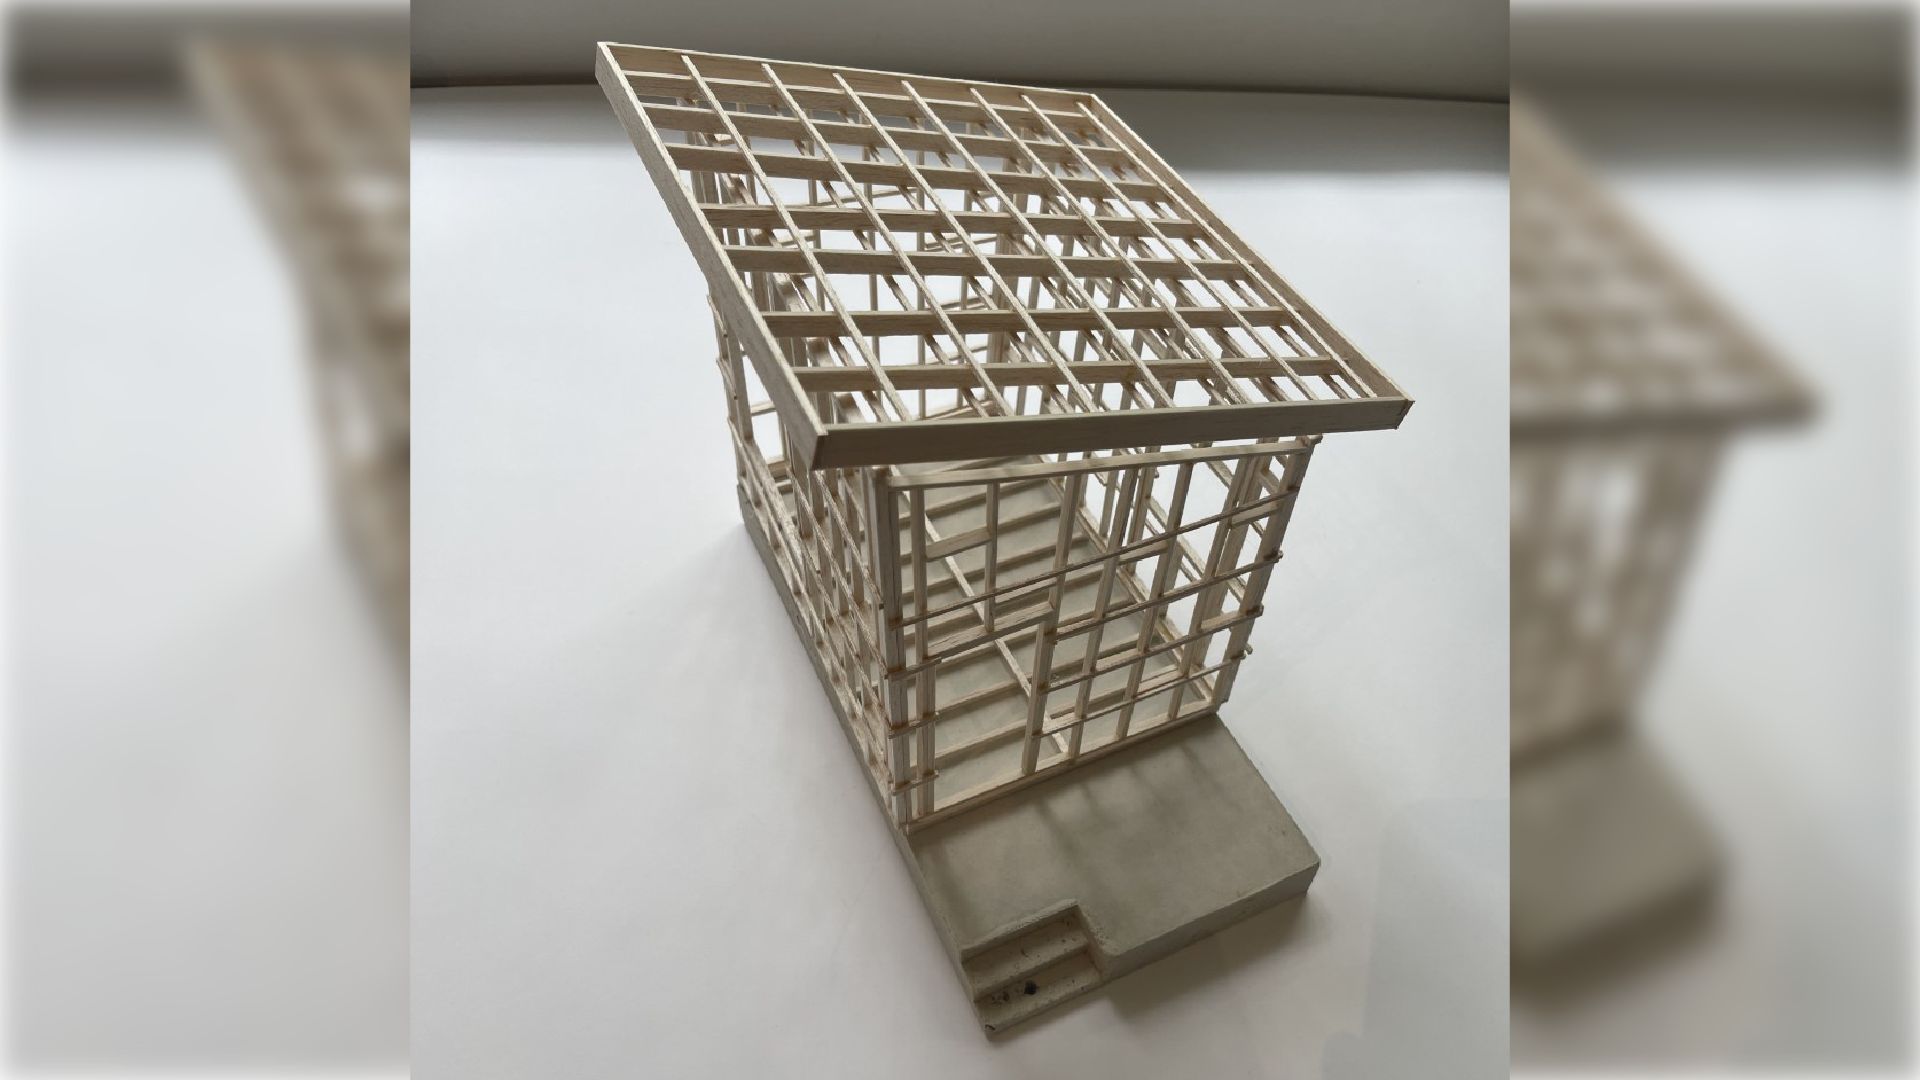 A model of timber joinery using innovative joining techniques instead of screws